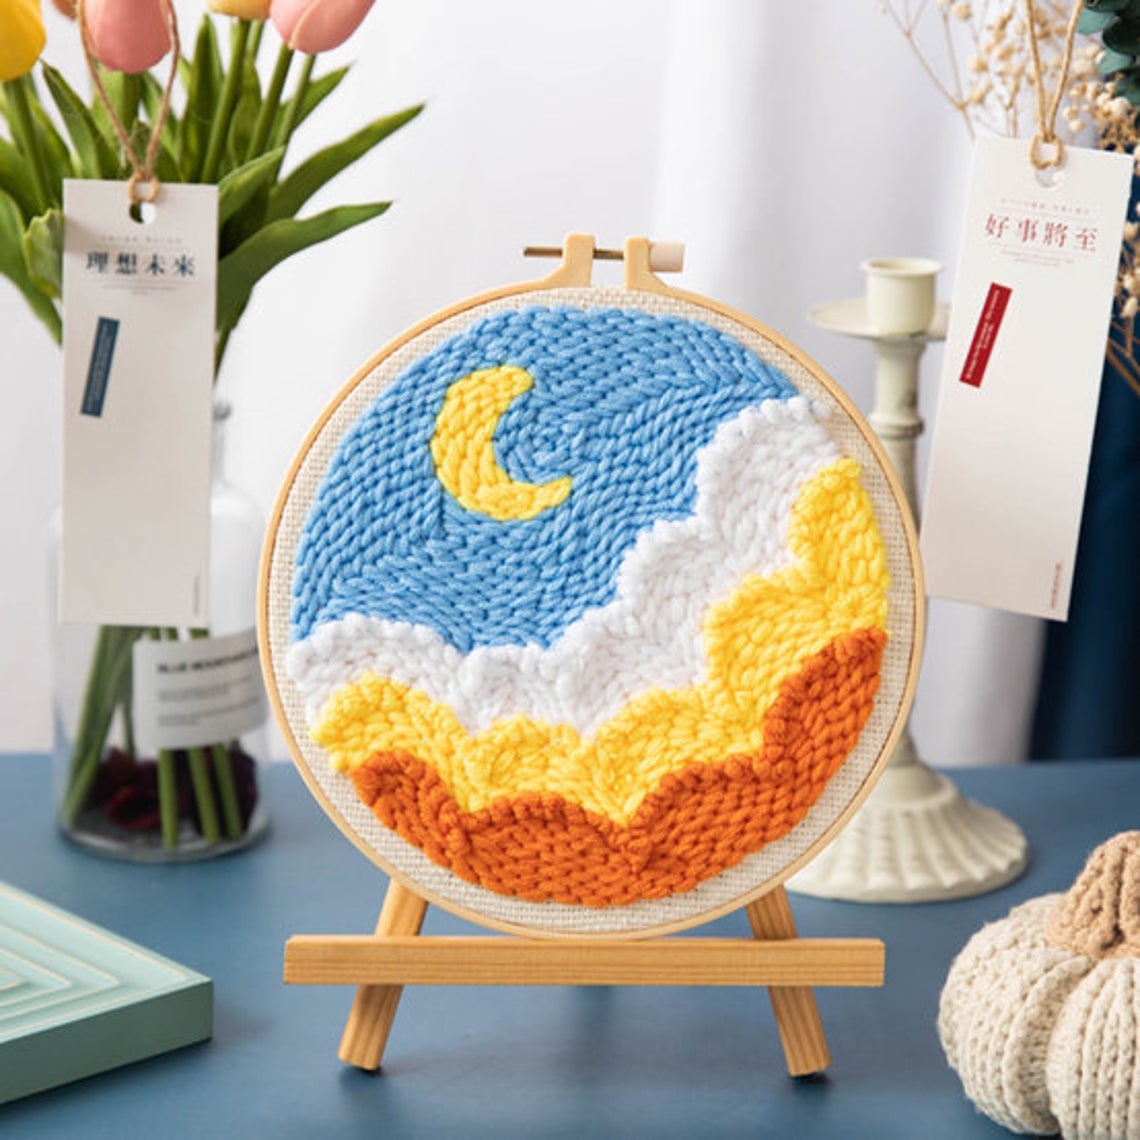 GATYZTORY Moon Scenery Punch Needle Embroidery Kits for Beginners